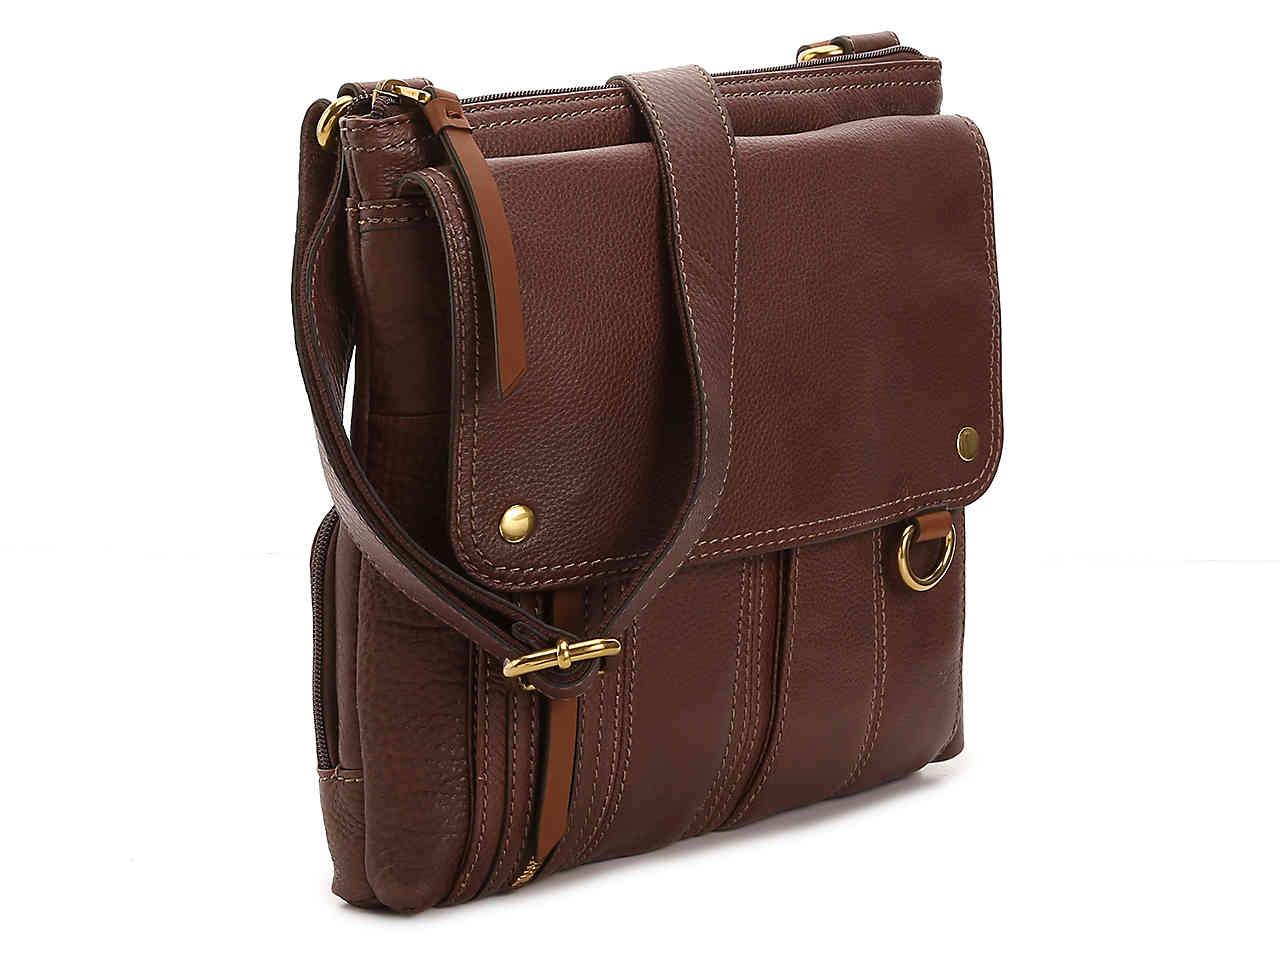 Fossil Morgan Leather Crossbody Bag in Brown - Lyst